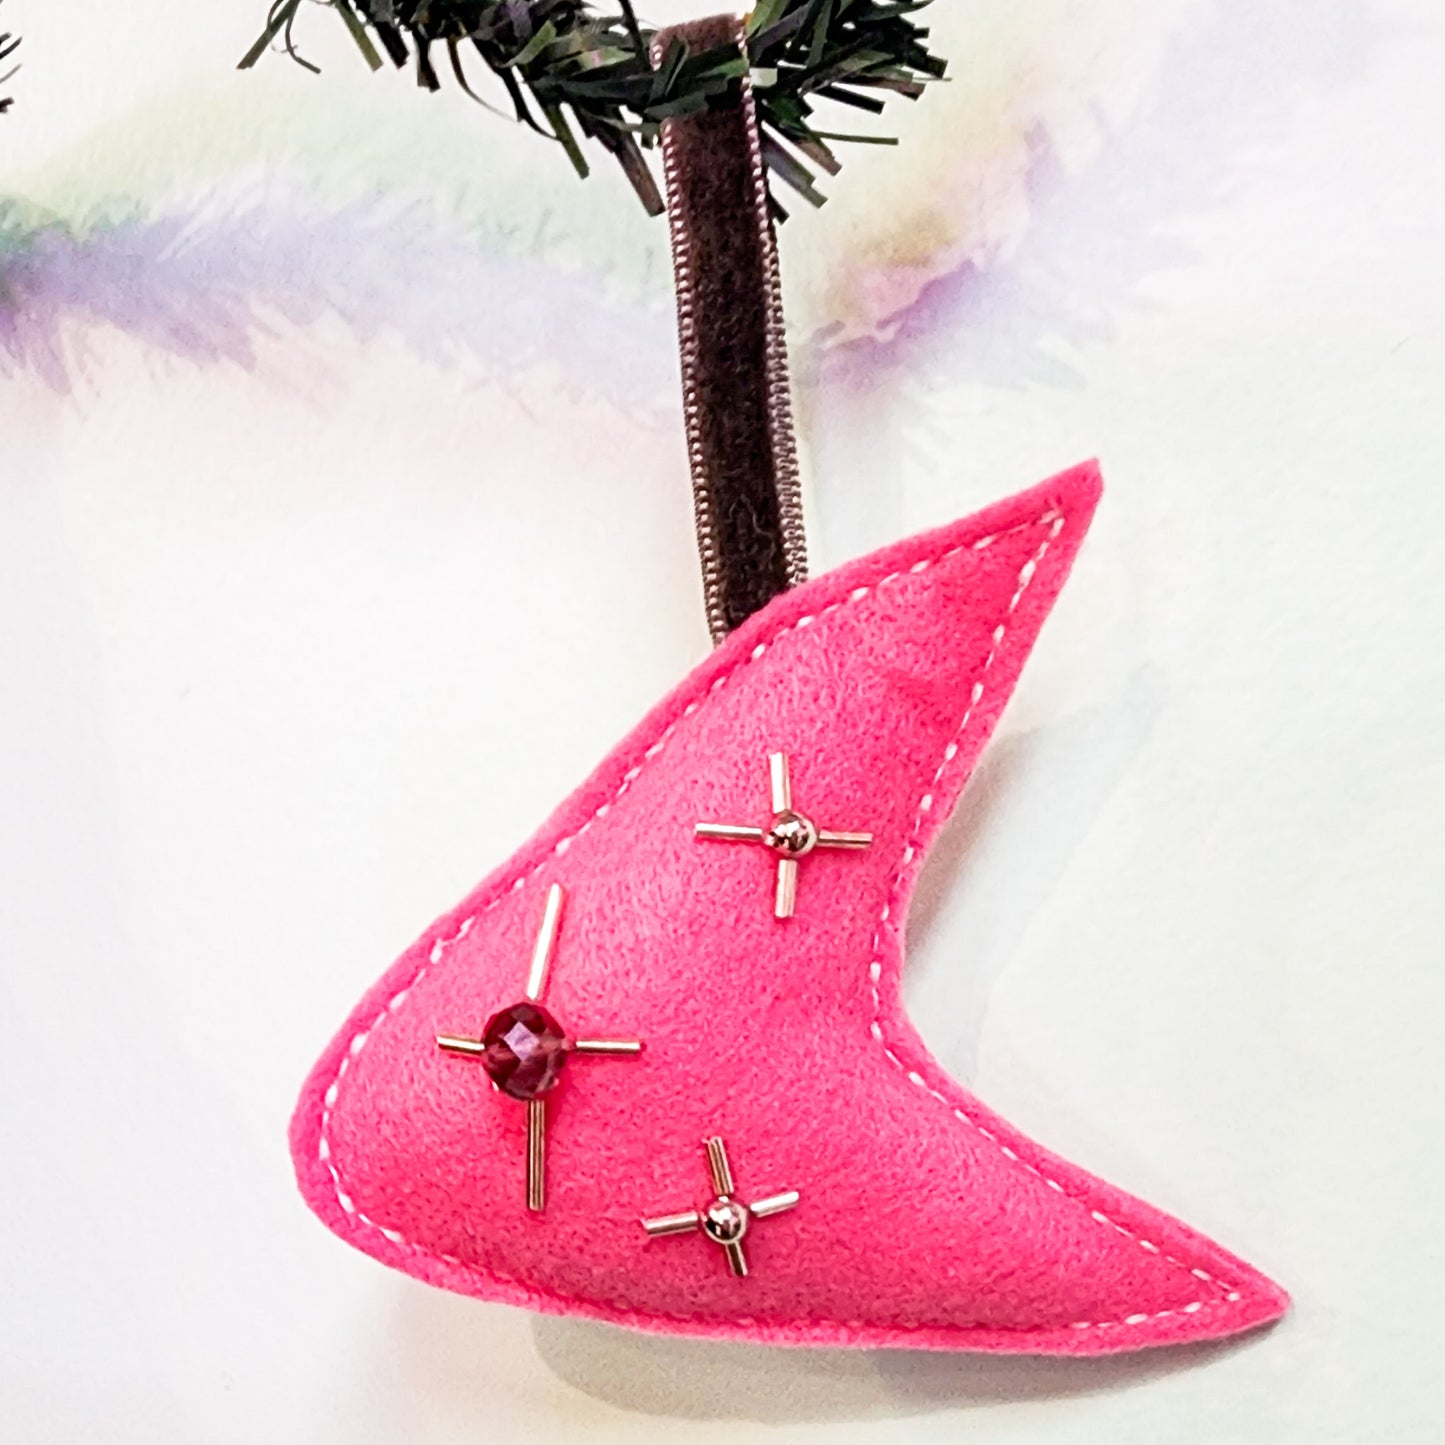 Retro Mid Century Modern Ornament by Hollyville